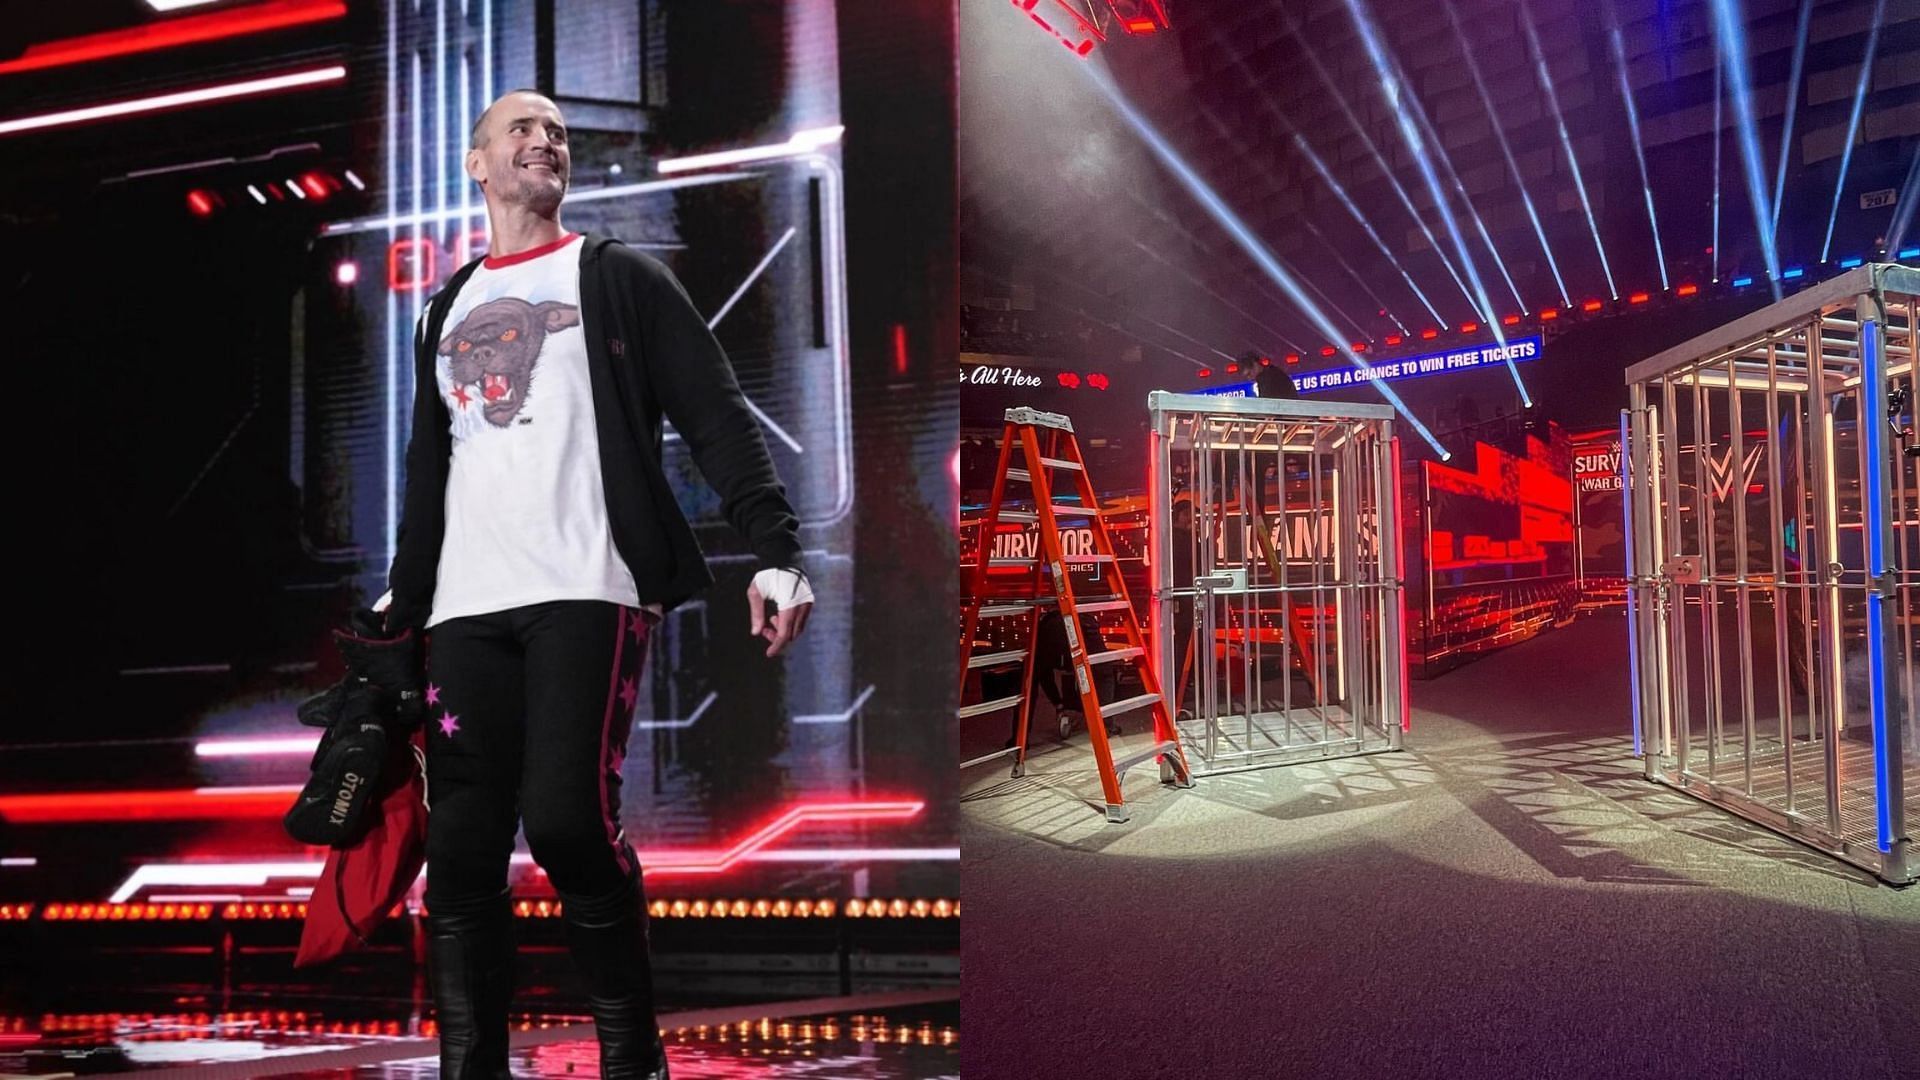 CM Punk has been speculated to make his return tomorrow at Survivor Series